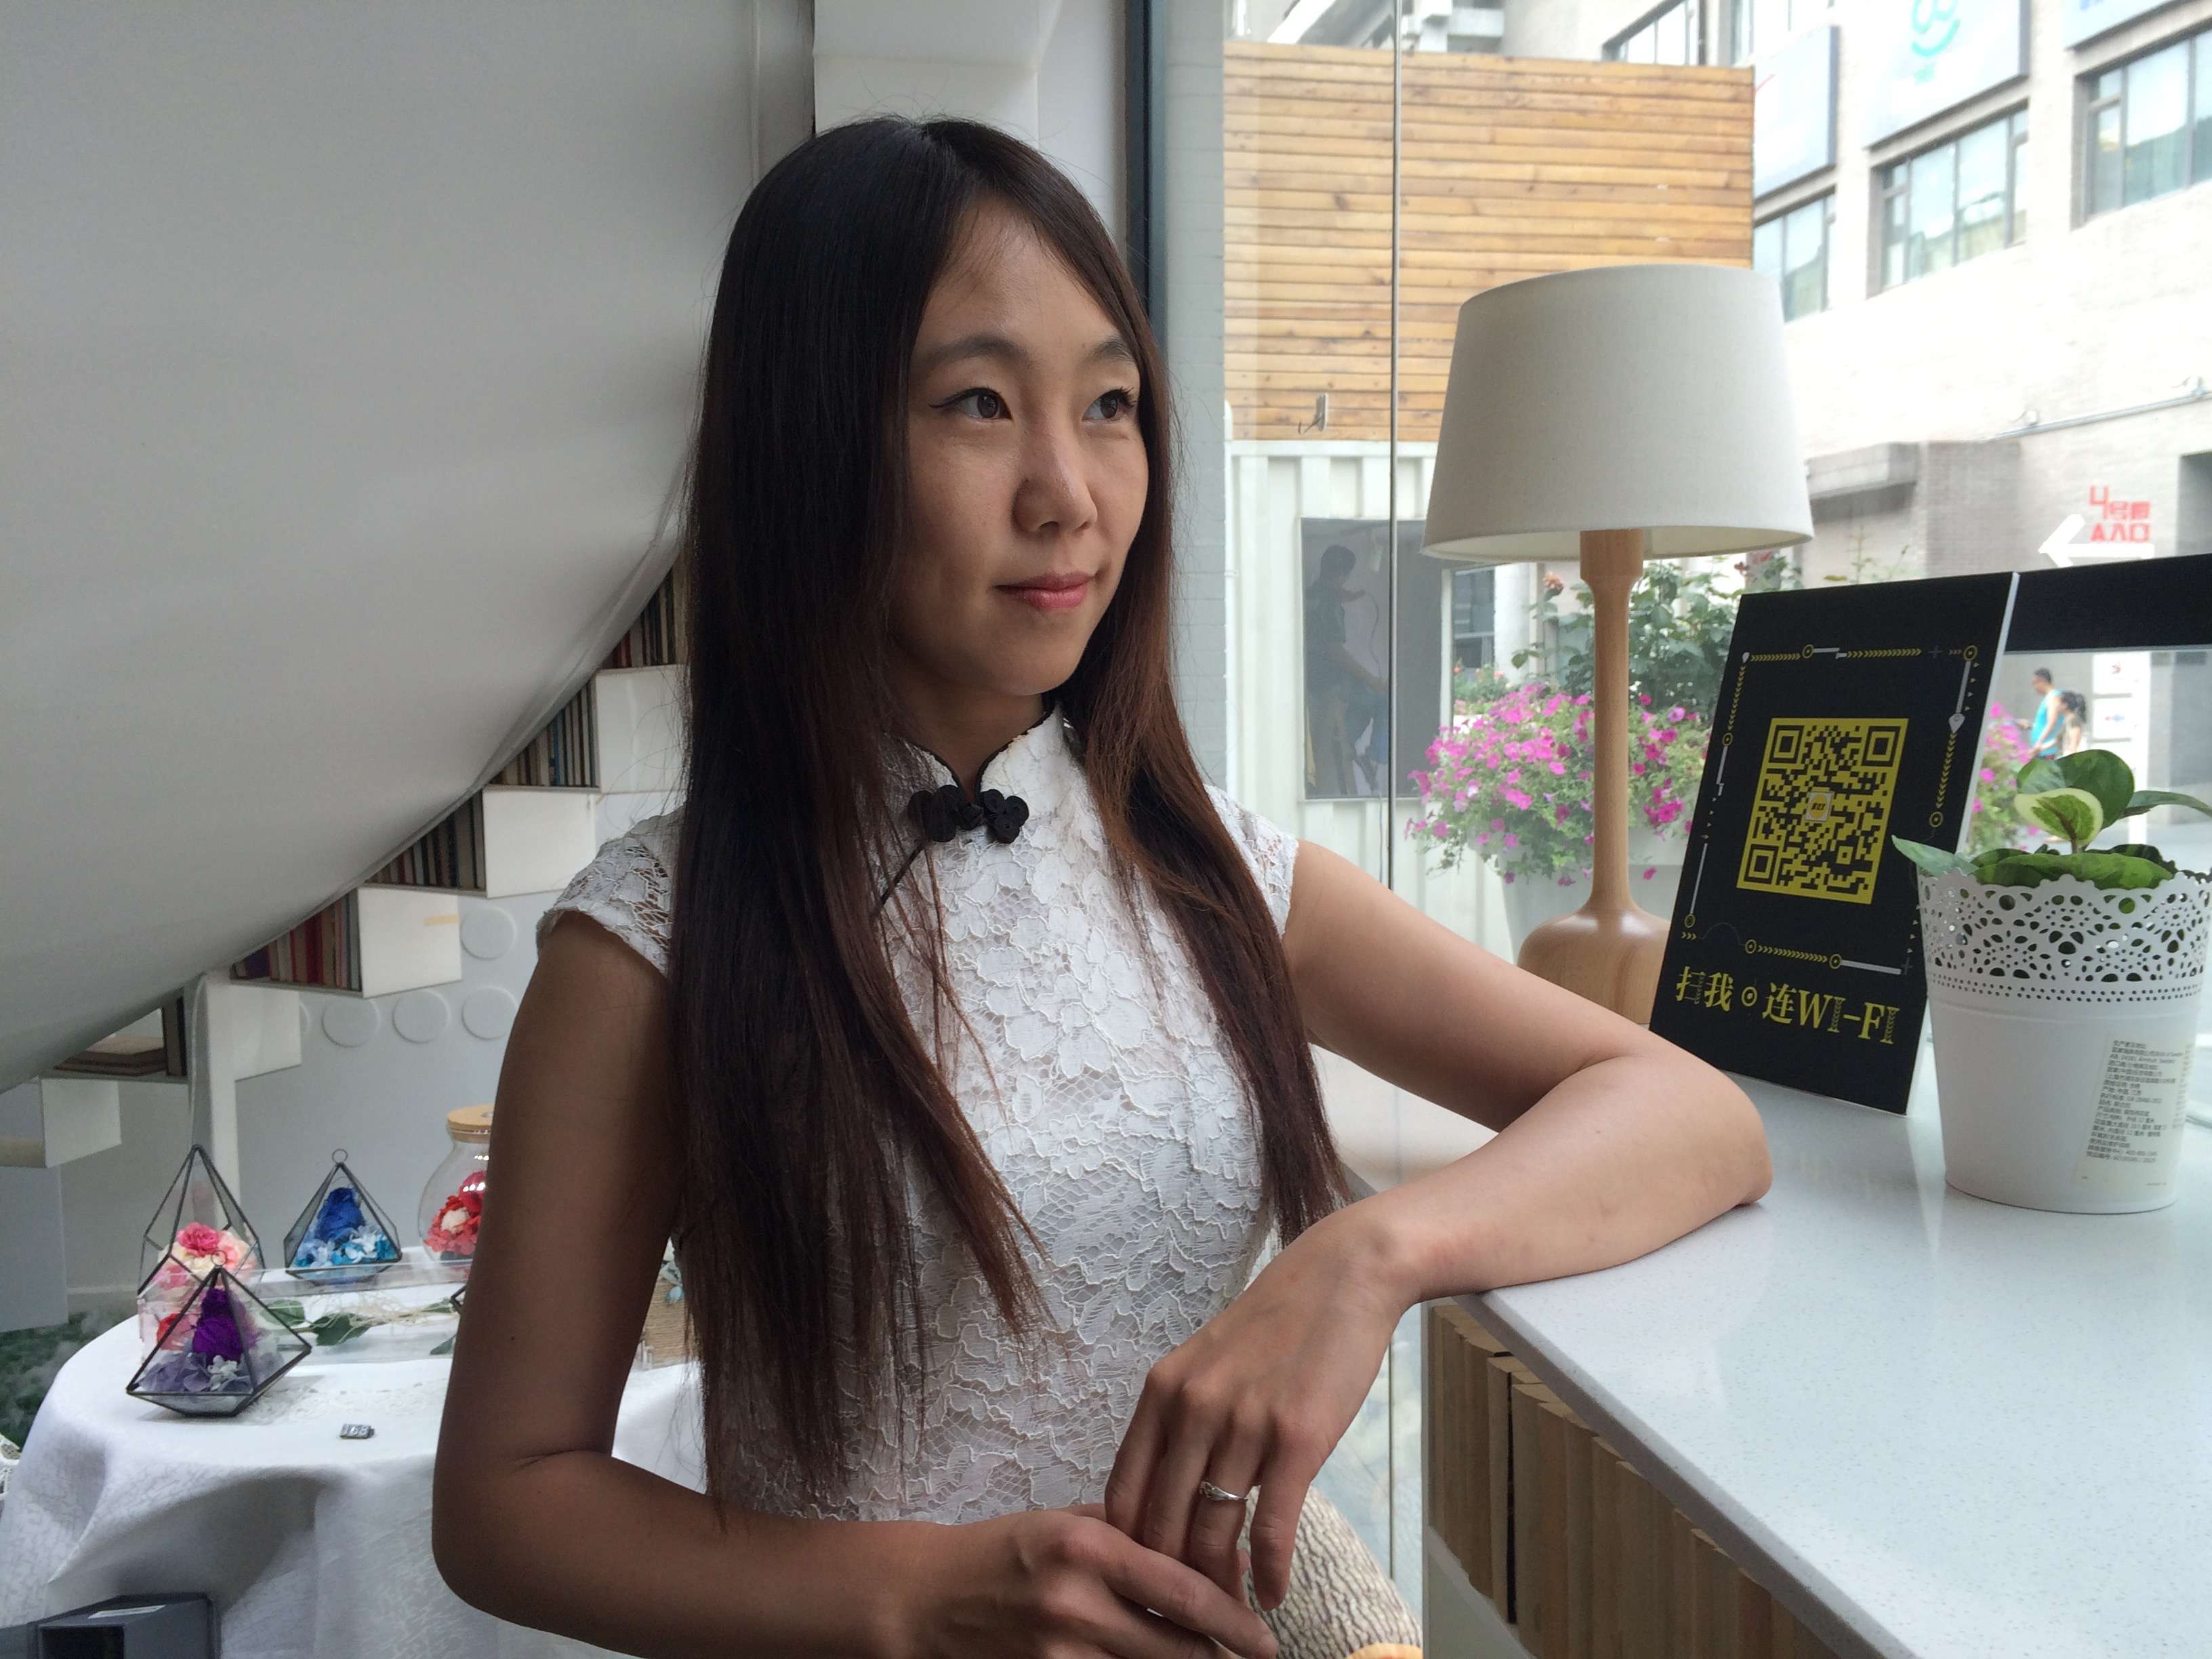 Hugo-nominated author Hao Jingfang, who has just published her first non-sci-fi outing, Born in 1984.